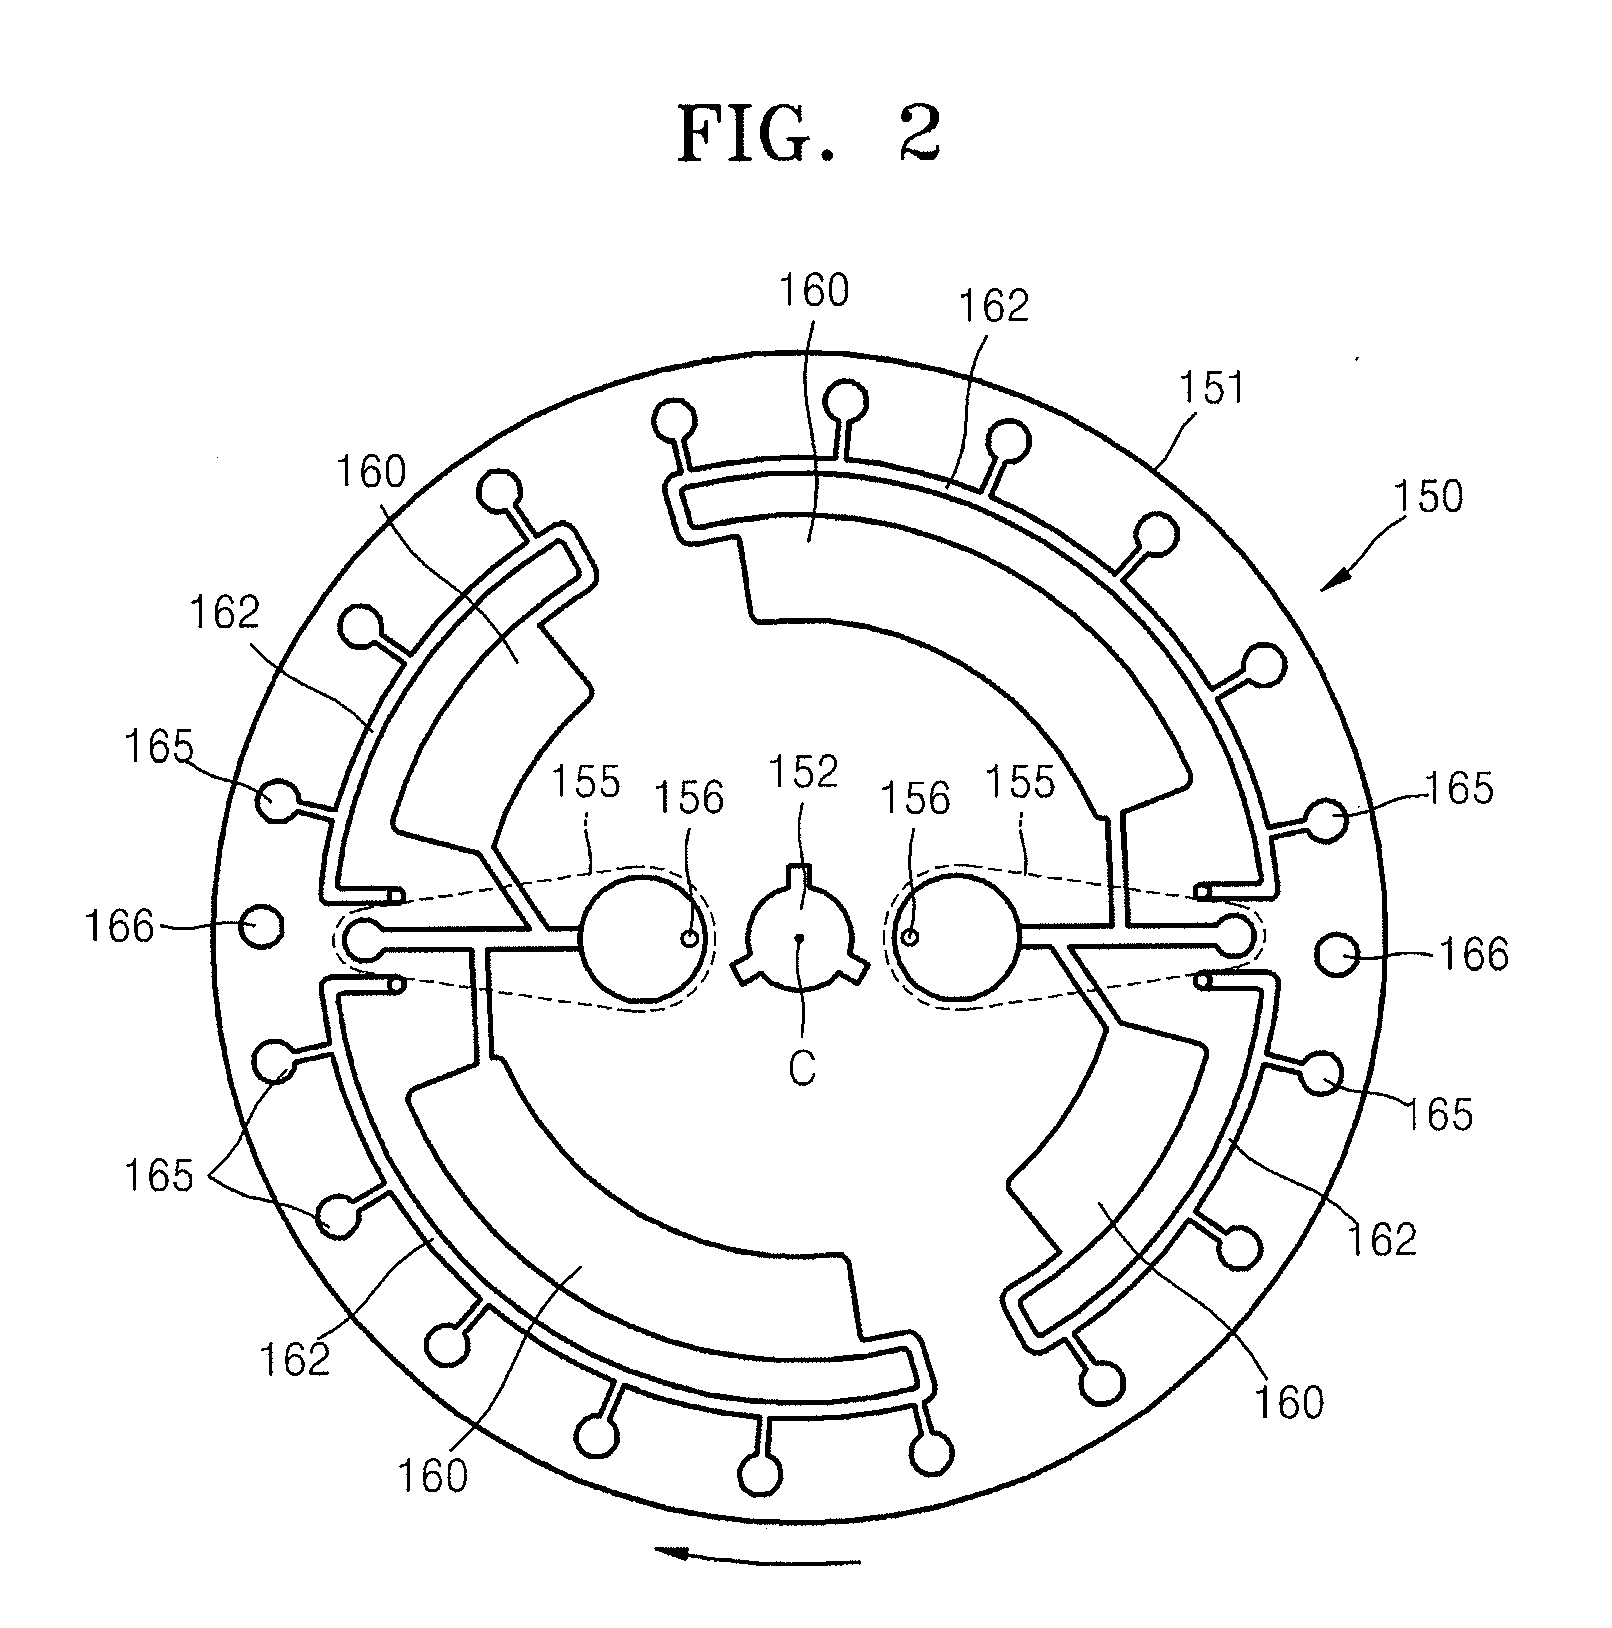 Optical detection apparatus, optical detection method, and microfluidic system including the optical detection apparatus